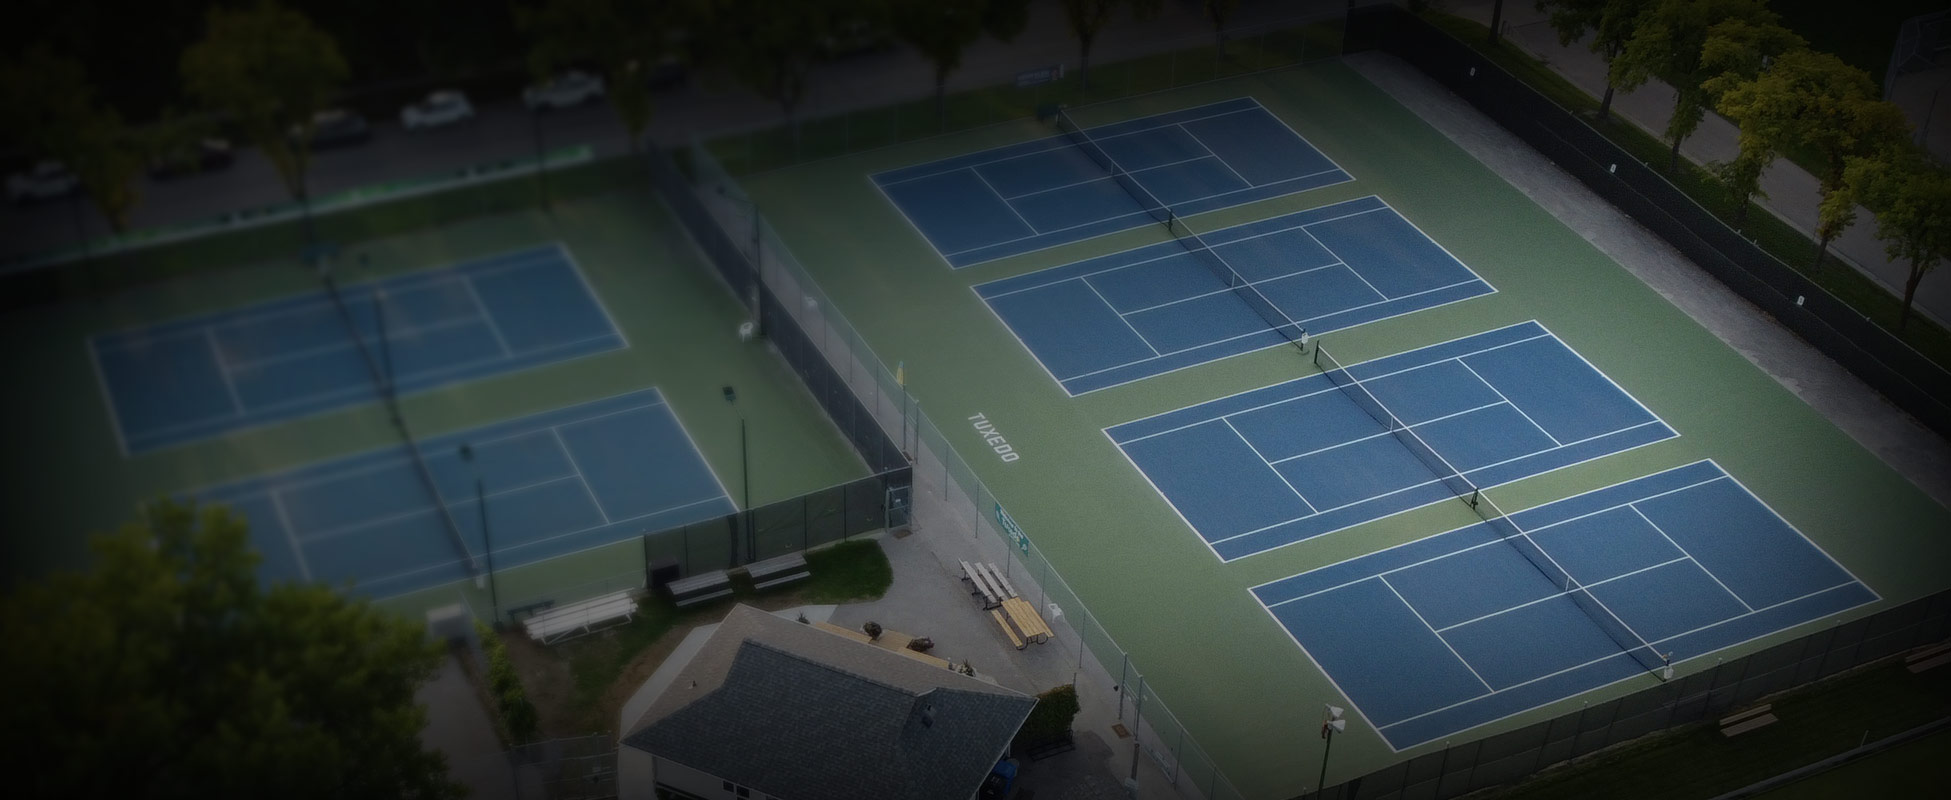 What do airports, parking lots, basketball courts & tennis nets have in common?